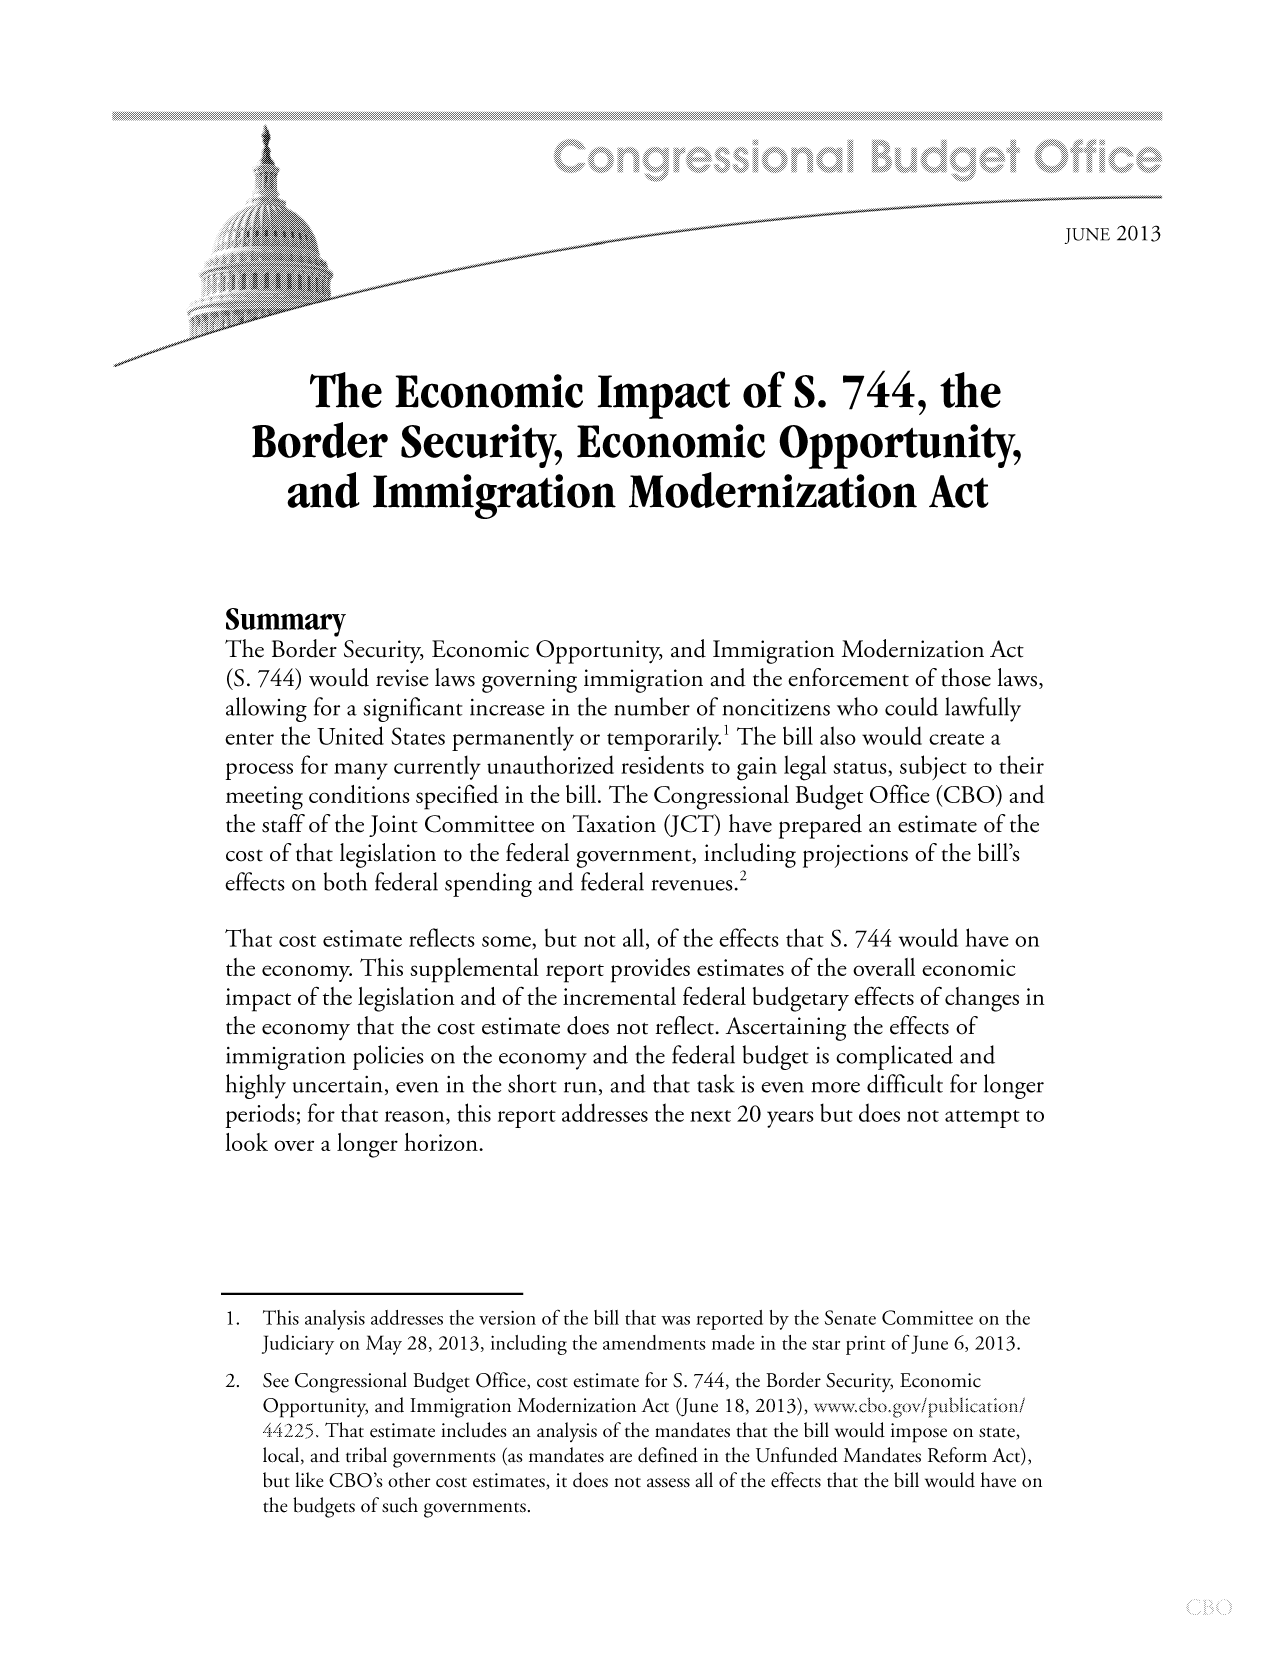 handle is hein.congrec/cbo11176 and id is 1 raw text is: JUNE 2013
The Economic Impact of S. 744, the
Border Security, Economic Opportunity,
and Immigration Modernization Act
Summary
The Border Security, Economic Opportunity, and Immigration Modernization Act
(S. 744) would revise laws governing immigration and the enforcement of those laws,
allowing for a significant increase in the number of noncitizens who could lawfully
enter the United States permanently or temporarily.1 The bill also would create a
process for many currently unauthorized residents to gain legal status, subject to their
meeting conditions specified in the bill. The Congressional Budget Office (CBO) and
the staff of the Joint Committee on Taxation (JCT) have prepared an estimate of the
cost of that legislation to the federal government, including projections of the bill's
effects on both federal spending and federal revenues.2
That cost estimate reflects some, but not all, of the effects that S. 744 would have on
the economy. This supplemental report provides estimates of the overall economic
impact of the legislation and of the incremental federal budgetary effects of changes in
the economy that the cost estimate does not reflect. Ascertaining the effects of
immigration policies on the economy and the federal budget is complicated and
highly uncertain, even in the short run, and that task is even more difficult for longer
periods; for that reason, this report addresses the next 20 years but does not attempt to
look over a longer horizon.
1.This analysis addresses the version of the bill that was reported by the Senate Committee on the
Judiciary on May 28, 2013, including the amendments made in the star print of June 6, 2013.
2. See Congressional Budget Office, cost estimate for 5. 744, the Border Security, Economic
Opportunity, and Immigration Modernization Act (June 18, 2013), xxxvcbogovipubiiationi
4425. That estimate includes an analysis of the mandates that the bill would impose on state,
local, and tribal governments (as mandates are defined in the Unfunded Mandates Reform Act),
but like CBO's other cost estimates, it does not assess all of the effects that the bill would have on
the budgets of such governments.


